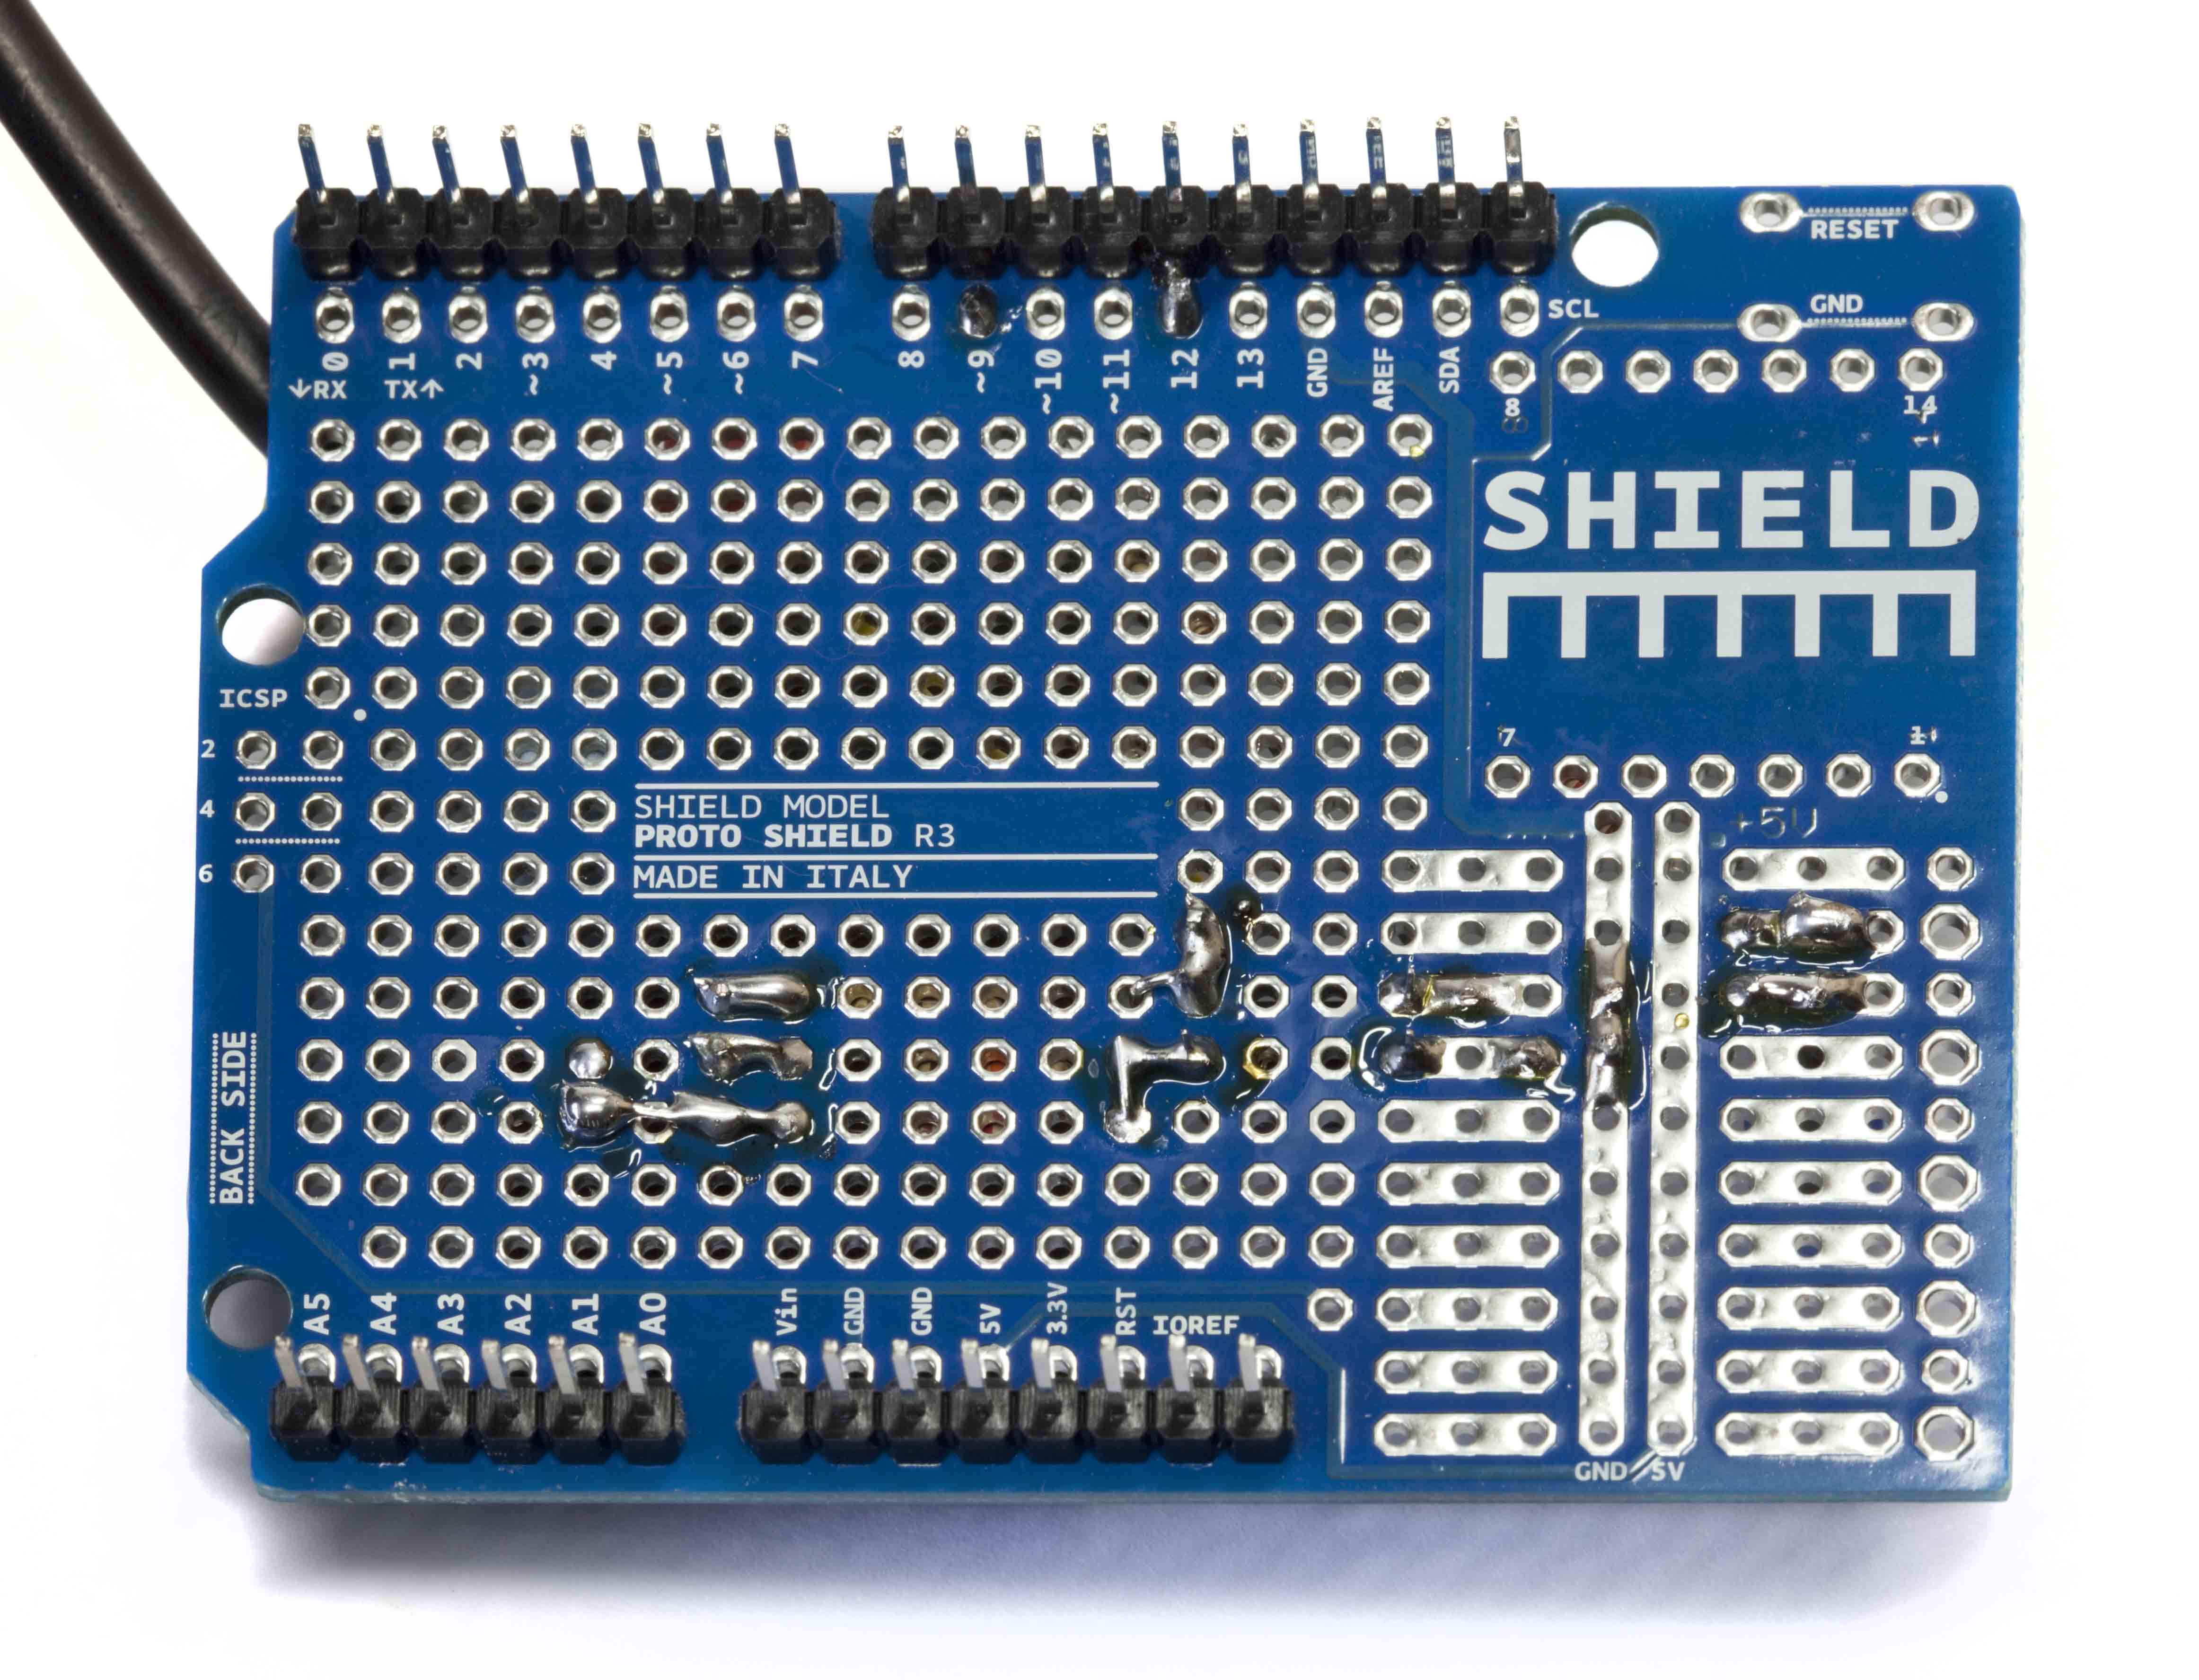 Arduino Proto Shield R3 with components